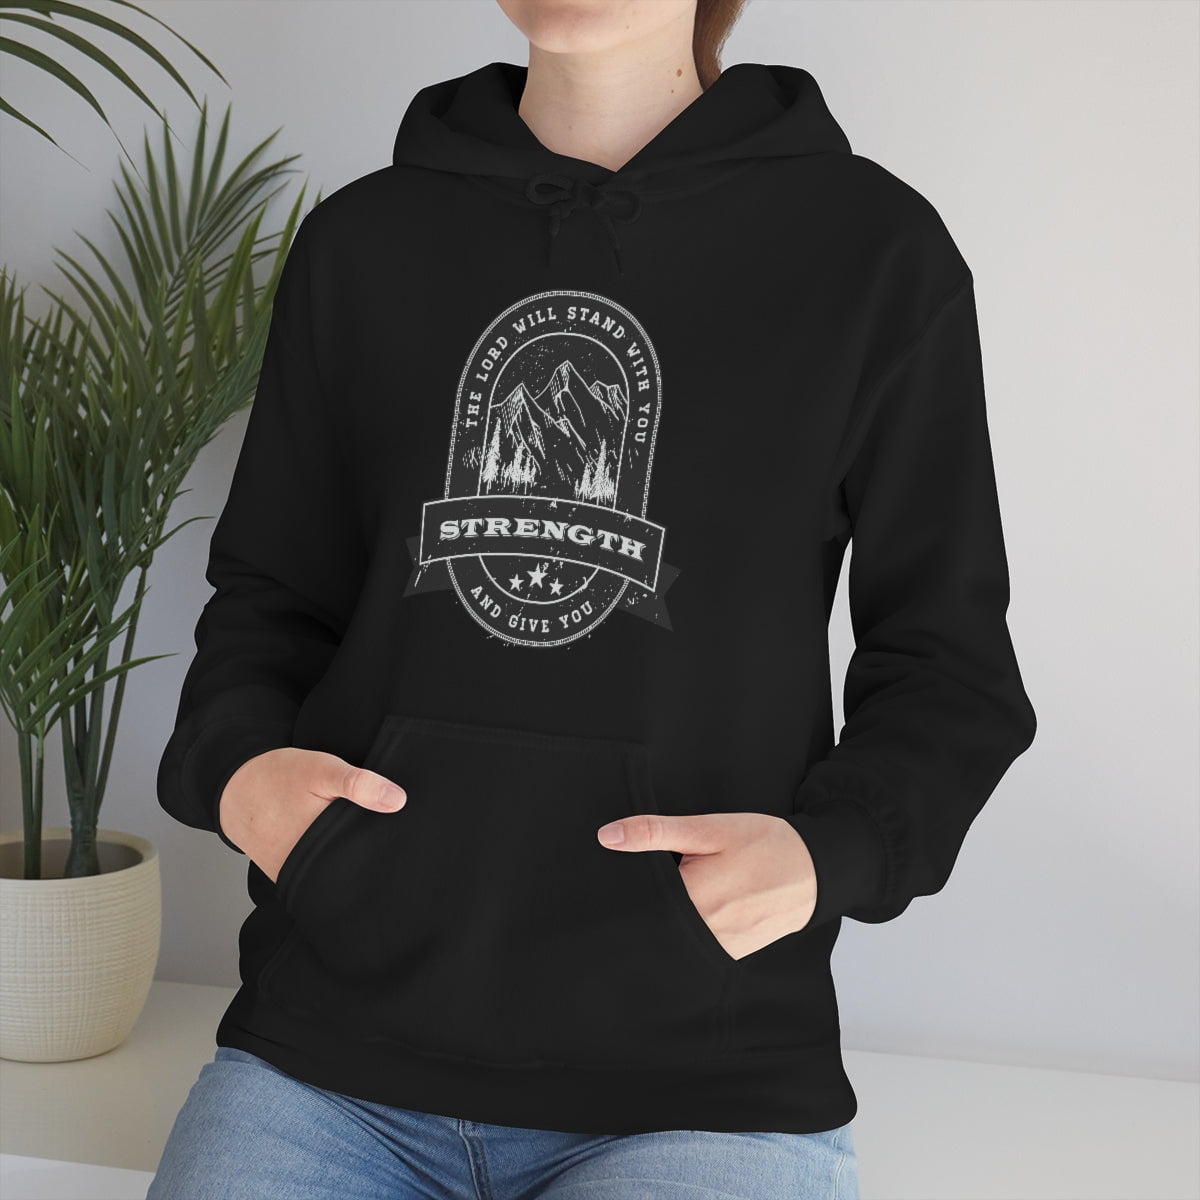 When you wear this hooded sweatshirt, you are instantly empowered with the truth that God will stand with you and give you strength. No matter what life throws your way, you can be hopeful knowing that the LORD is right by your side. This shirt is the perfect way to share your faith with those around you and let them know that they are not alone in their struggles. With its simple and encouraging message, you can help lead someone to Christ.